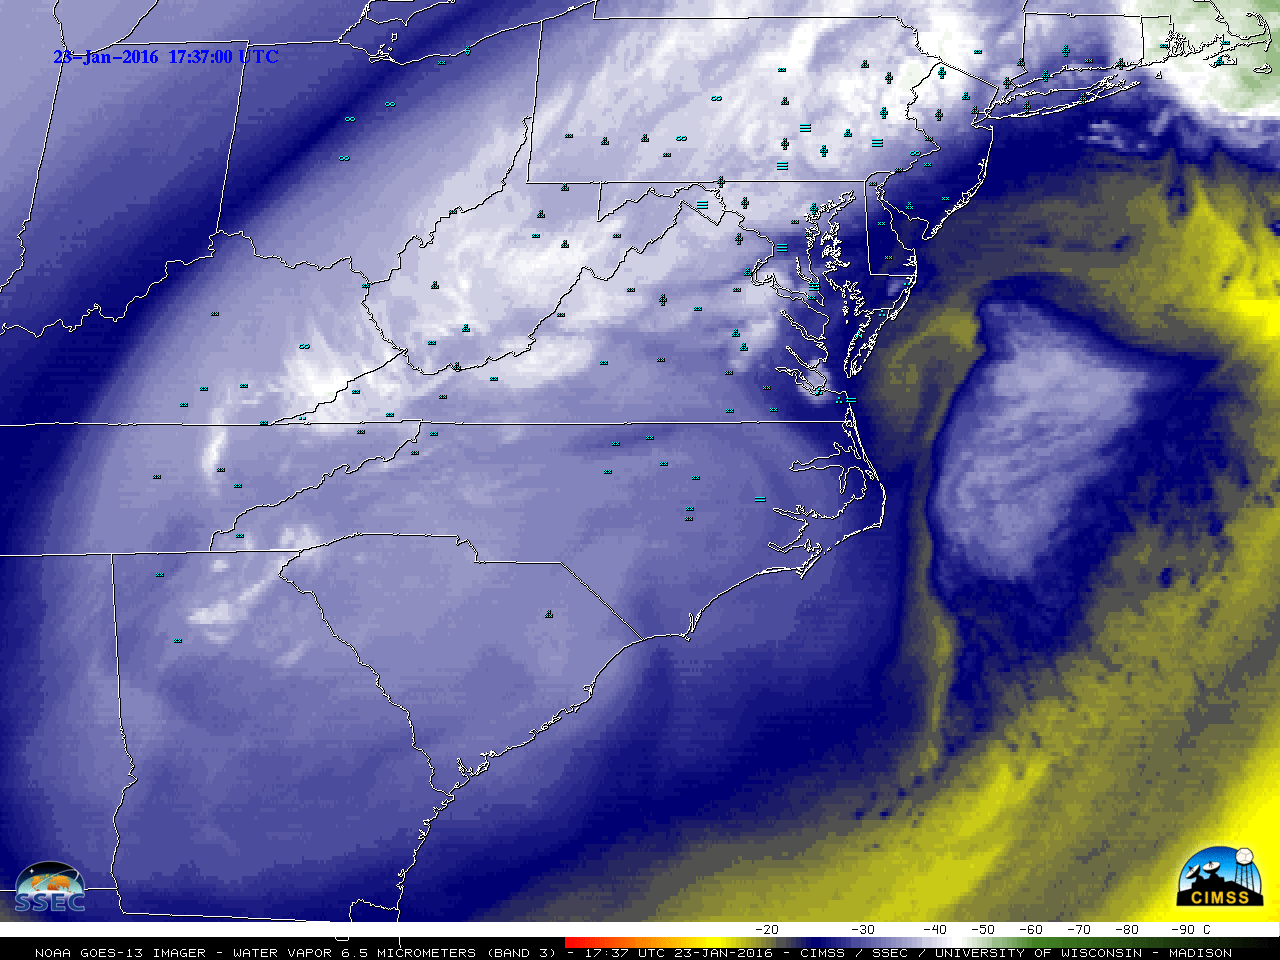 GOES-13 Water Vapor (6.5 µm) images, with surface weather symbols [click to play MP4 animation]